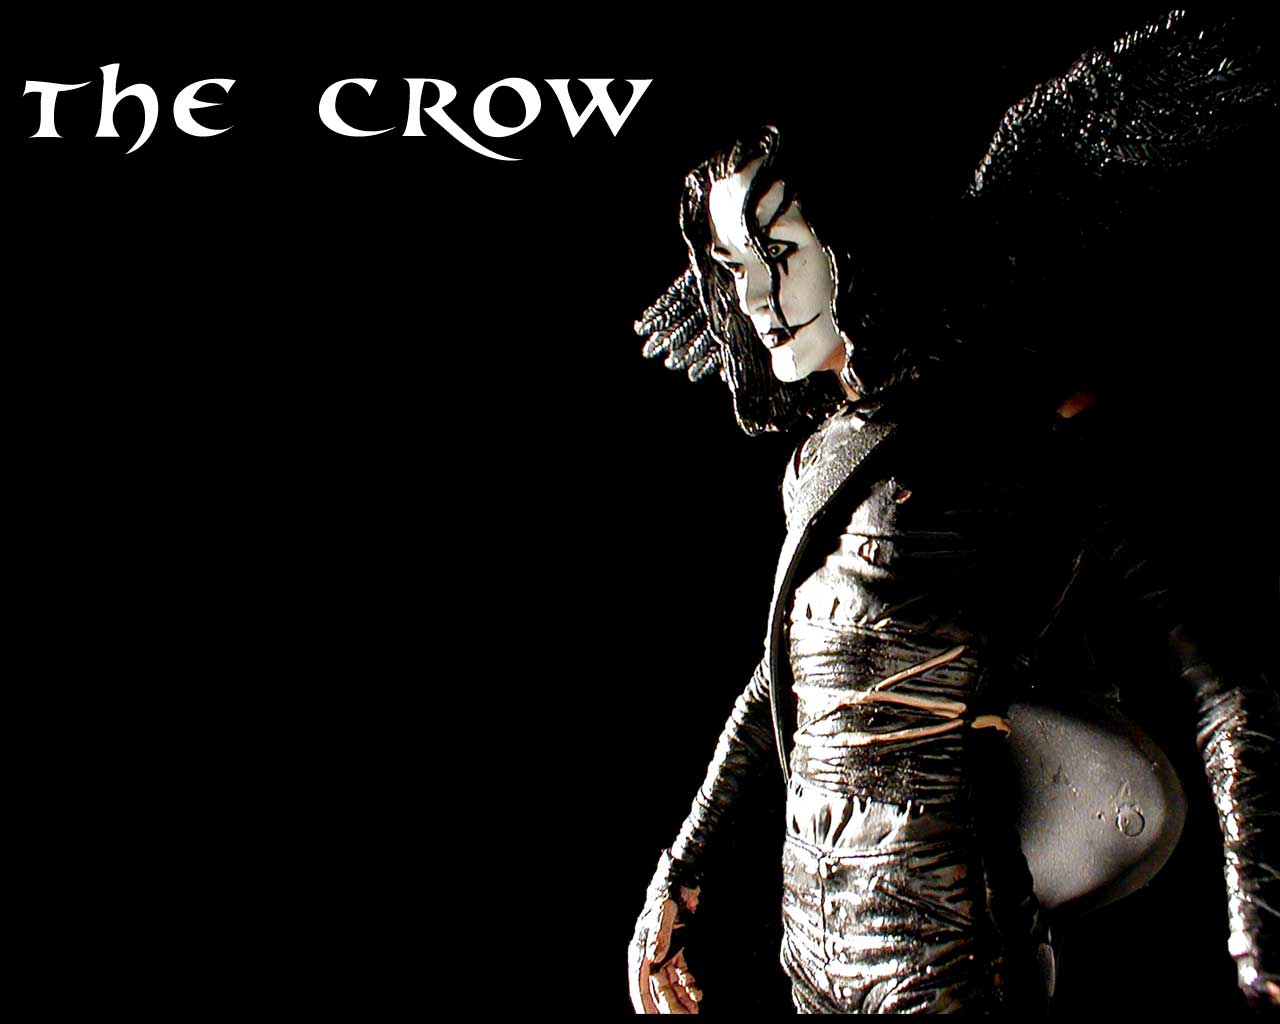 The Crow Posters Buy A Poster